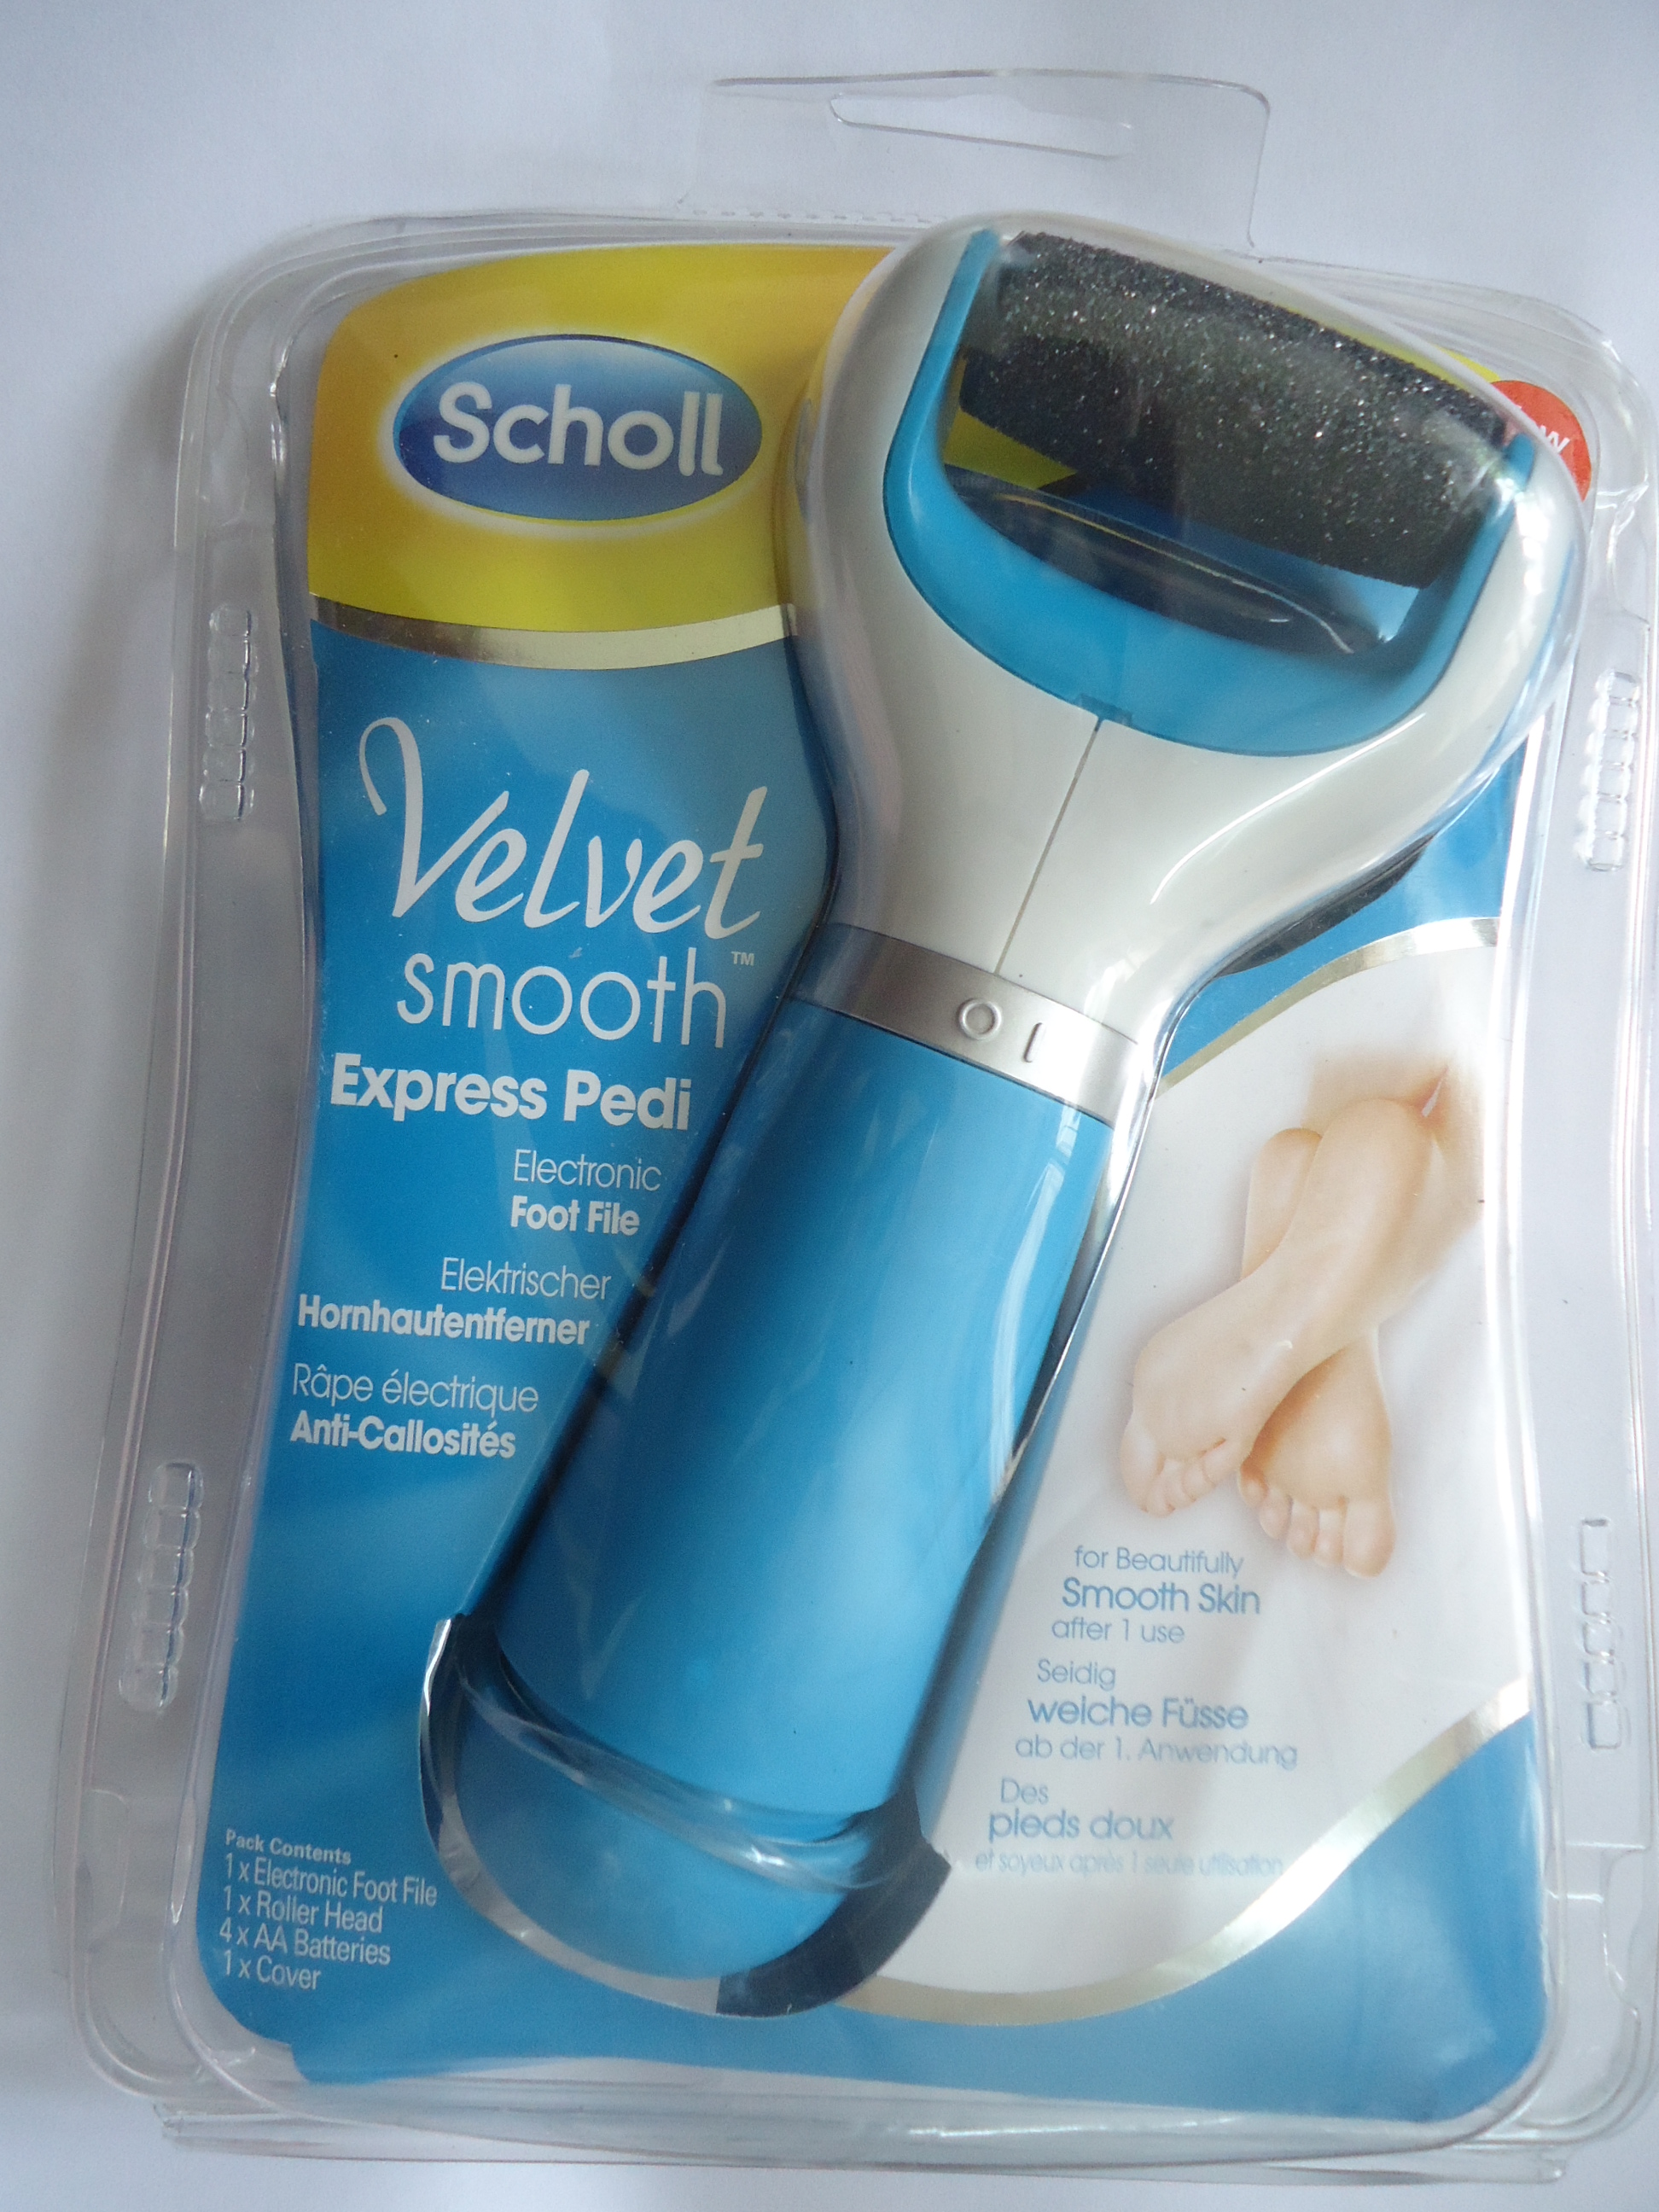 Of anders College racket Scholl Velvet Smooth Express Pedi Electronic Foot File Review - New Love -  Makeup